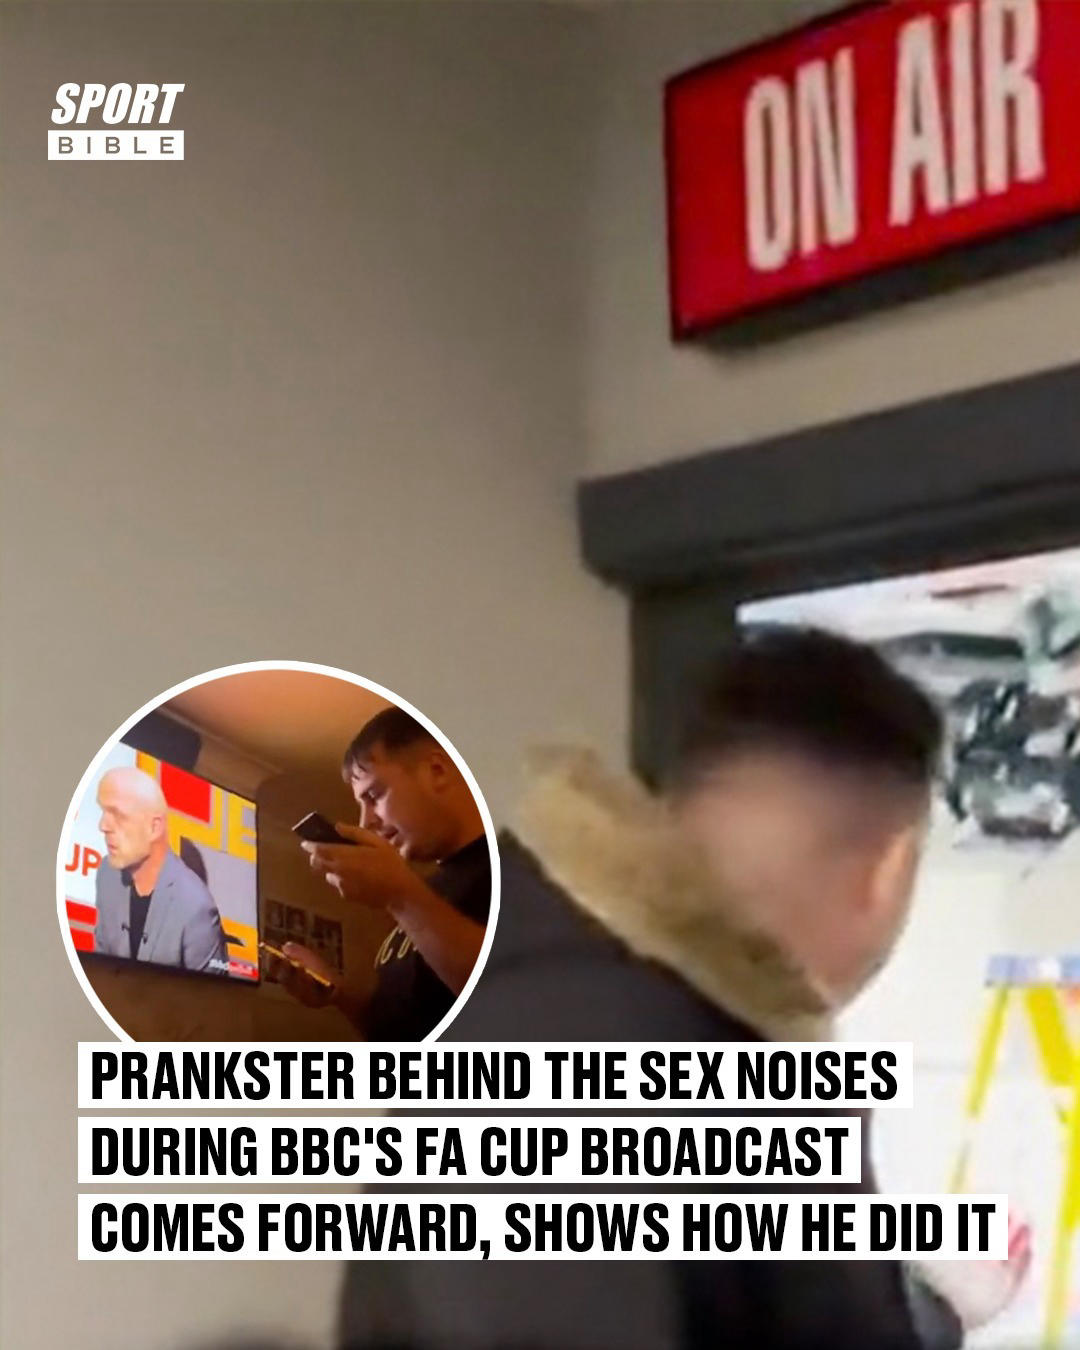 SPORTbible - The man responsible for the incredible sex noise prank on the BBC has come forward, sho